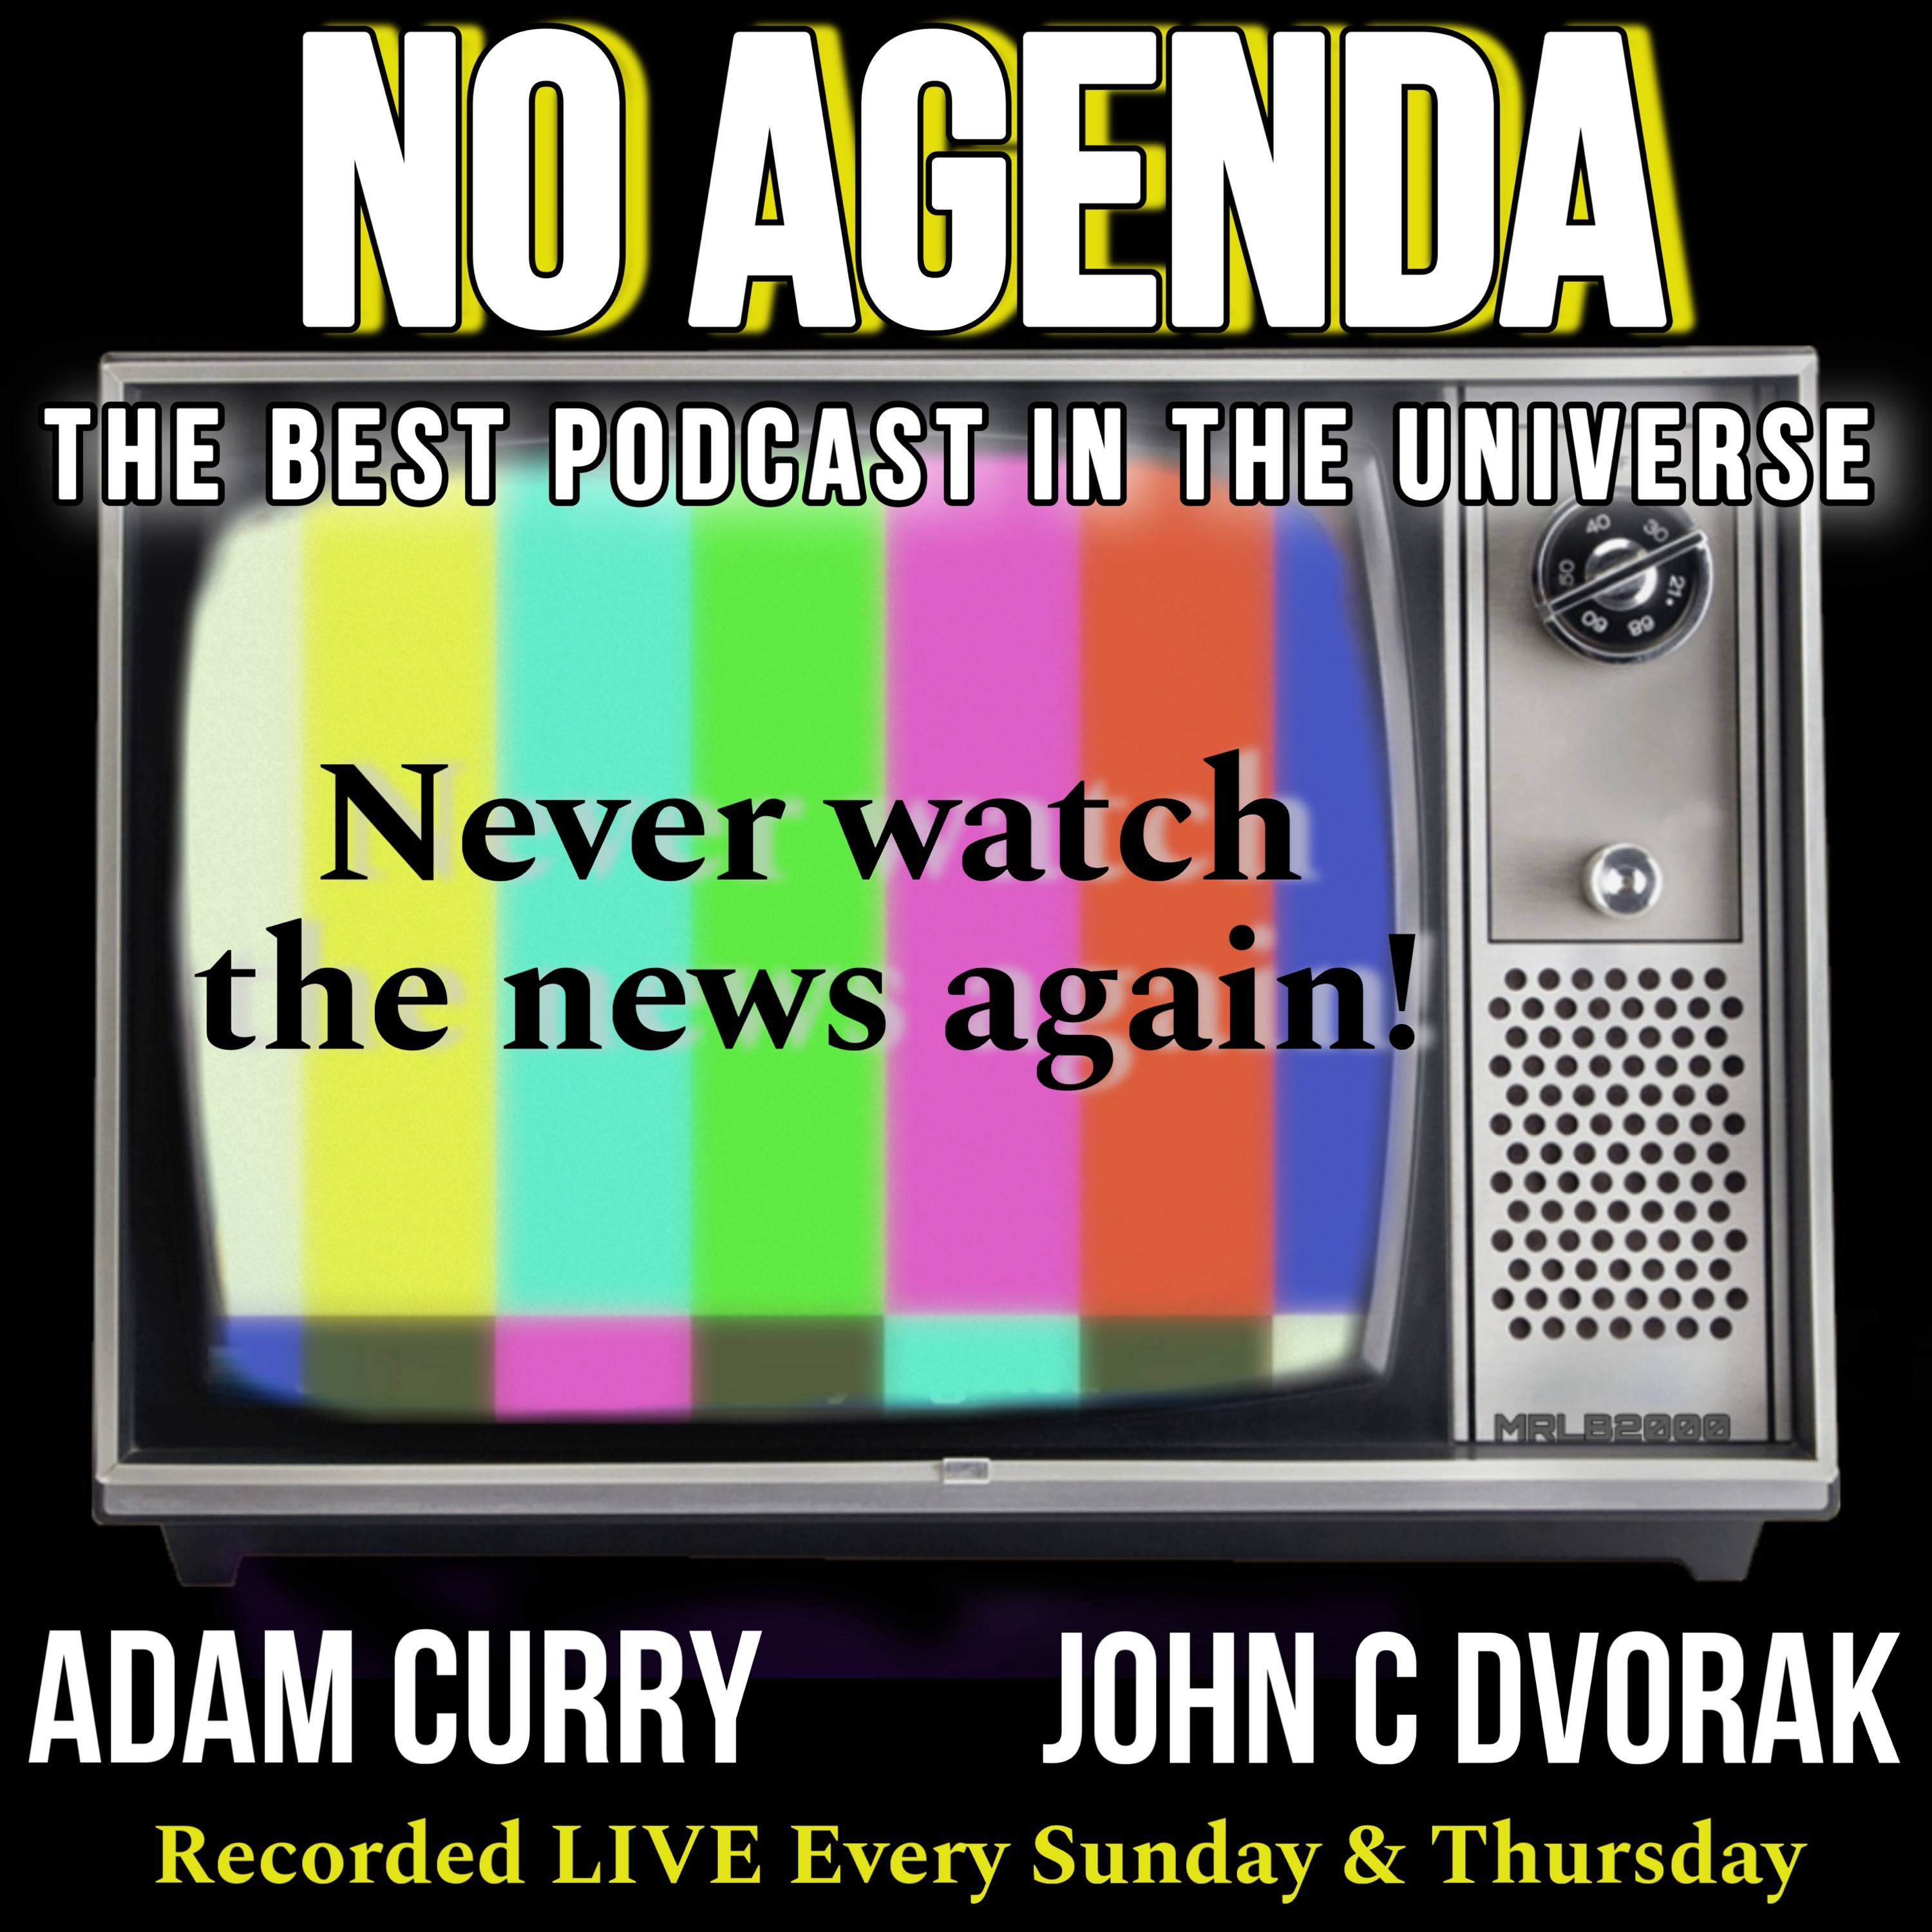 No More TV news, just No Agenda by Sweet Cheeks for 